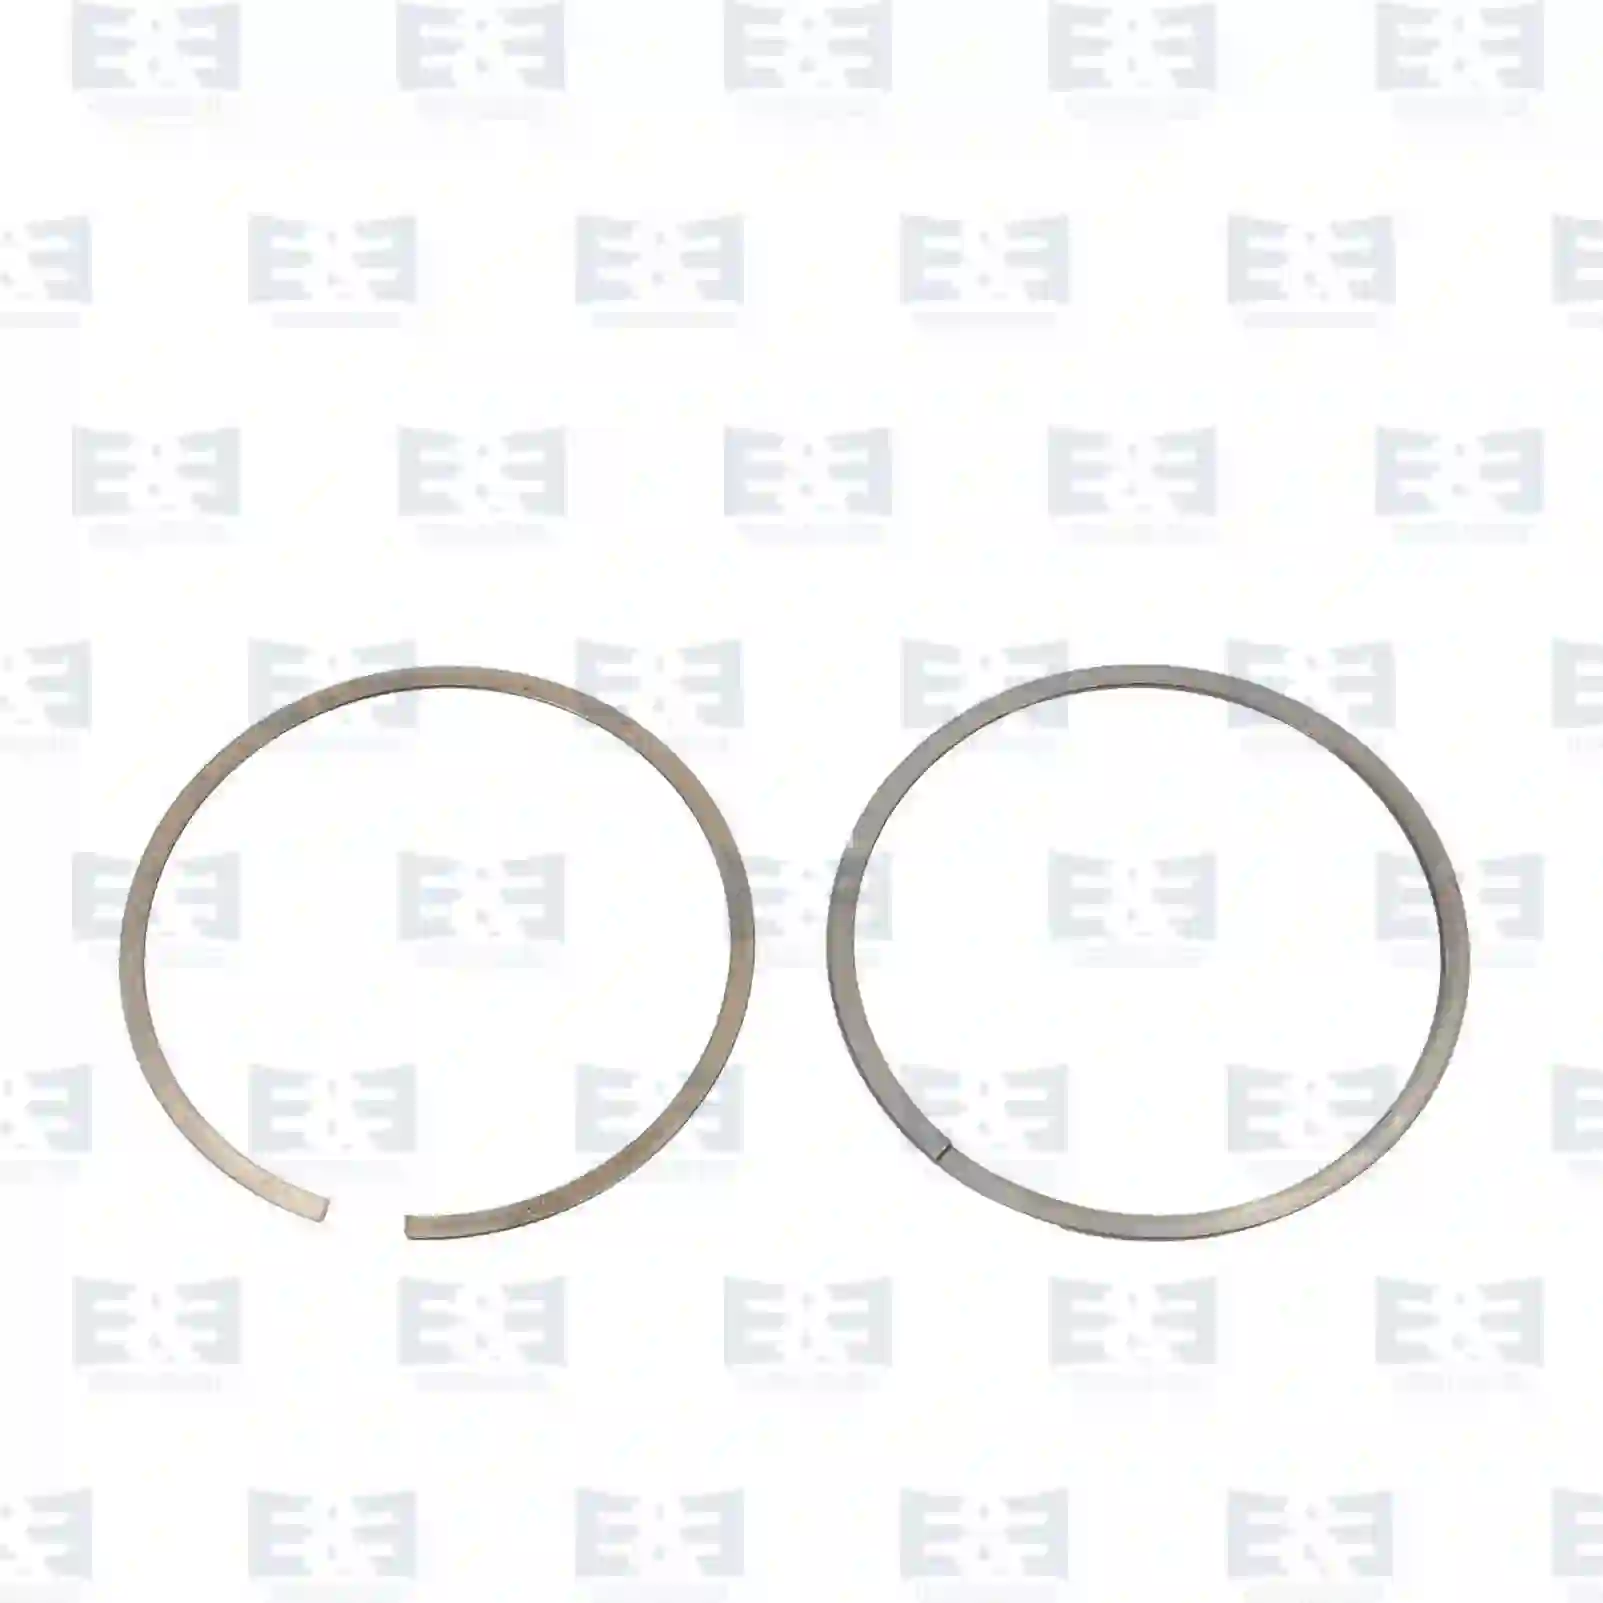  Seal ring kit, exhaust manifold || E&E Truck Spare Parts | Truck Spare Parts, Auotomotive Spare Parts